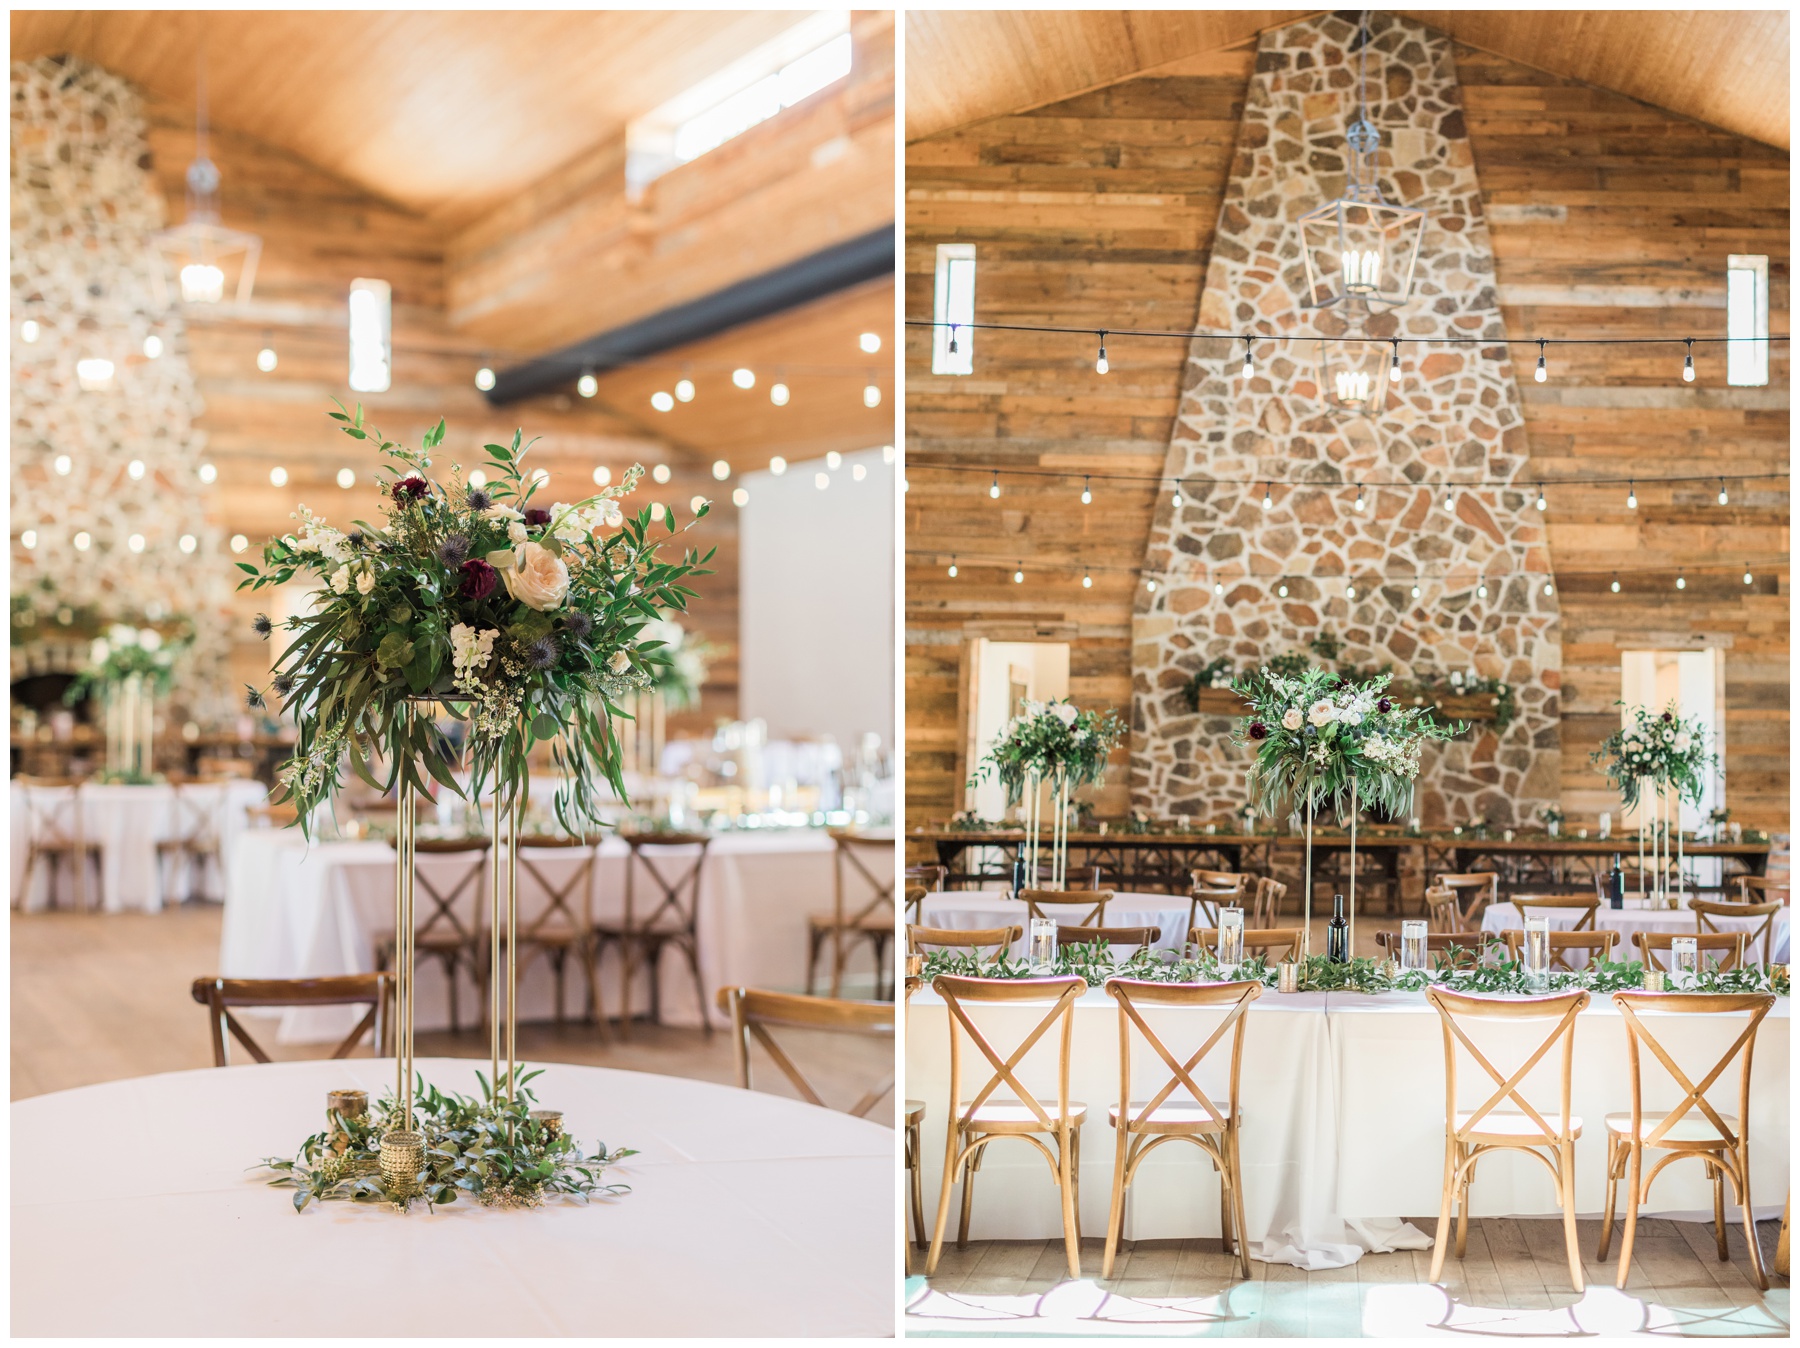 Wooden bistro chairs, cafe lights, and elevated floral centerpieces for a spring wedding reception